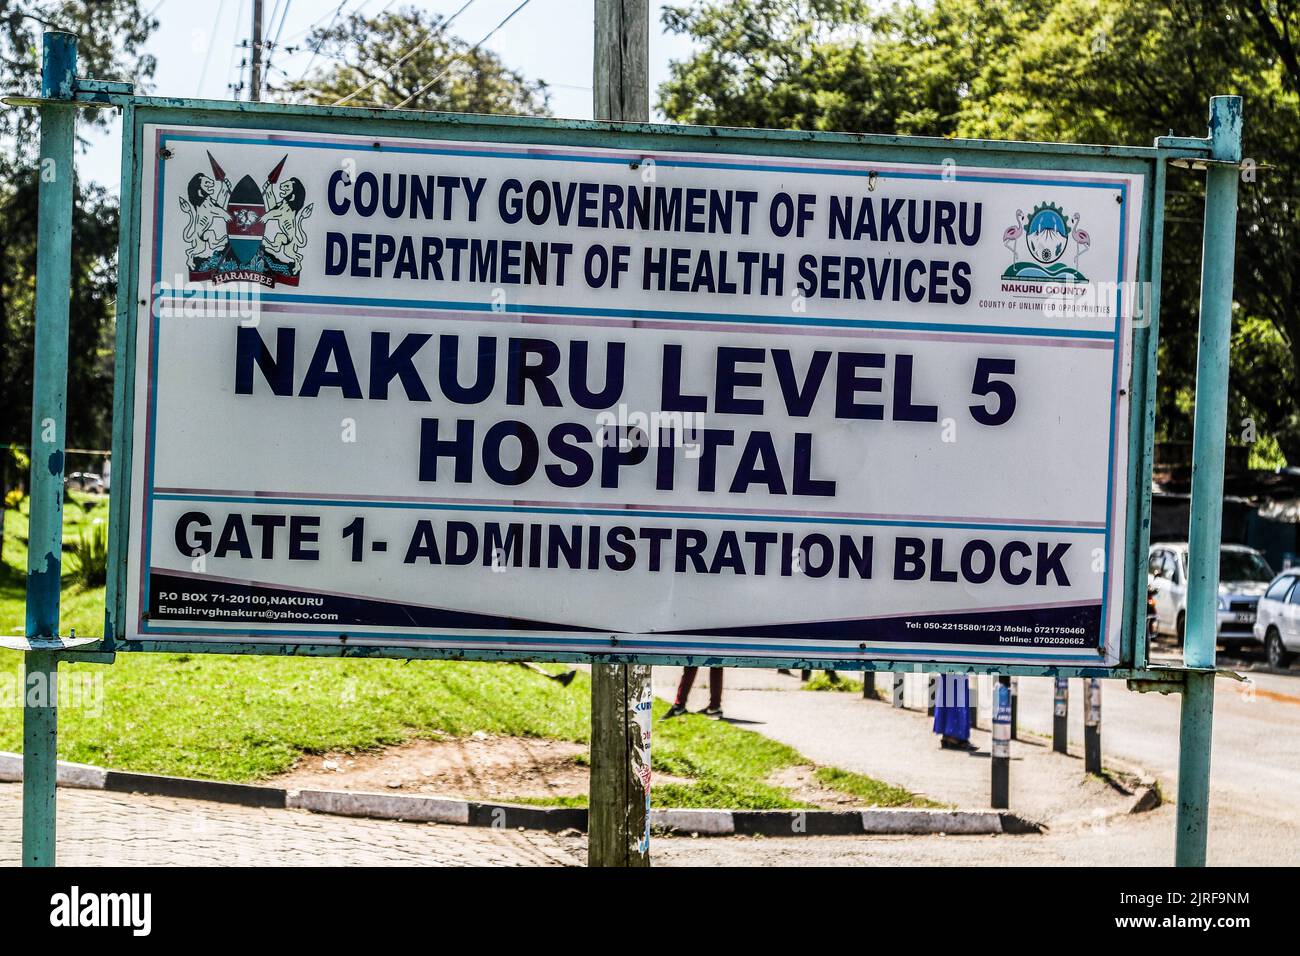 A general view of a Nakuru Level 5 hospital sign board in Nakuru town where two children affected by swine flu virus (H1N1) are admitted. The government says its has contained a swine flu (H1N1) outbreak reported in Kiptangwanyi village. The viral disease has claimed the life of one child and left 8 others admitted at  Nakuru Level 5 and Kiptangwanyi Health Centre in Elementaita Ward. Stock Photo